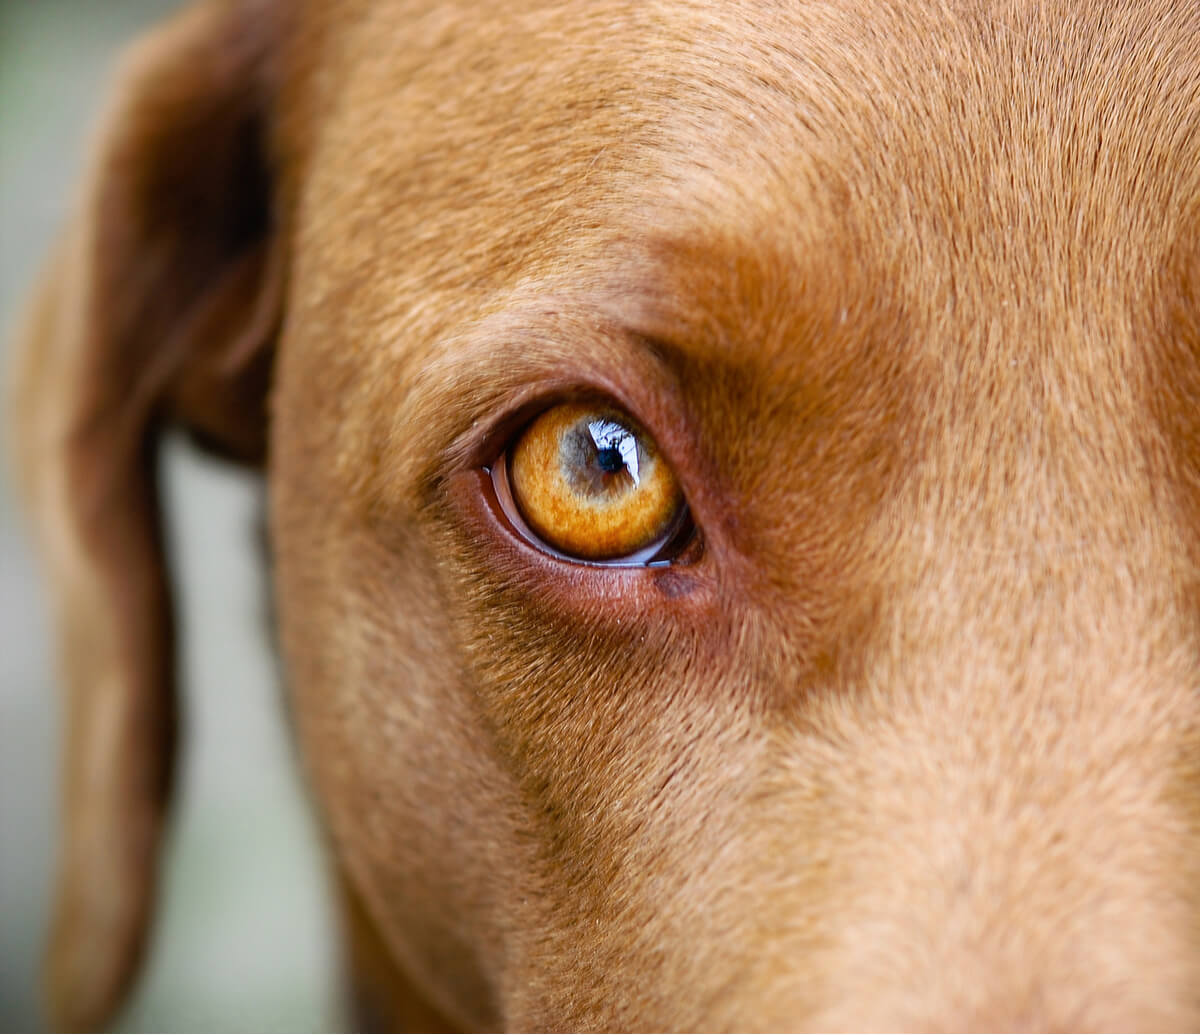 The eye of a dog.